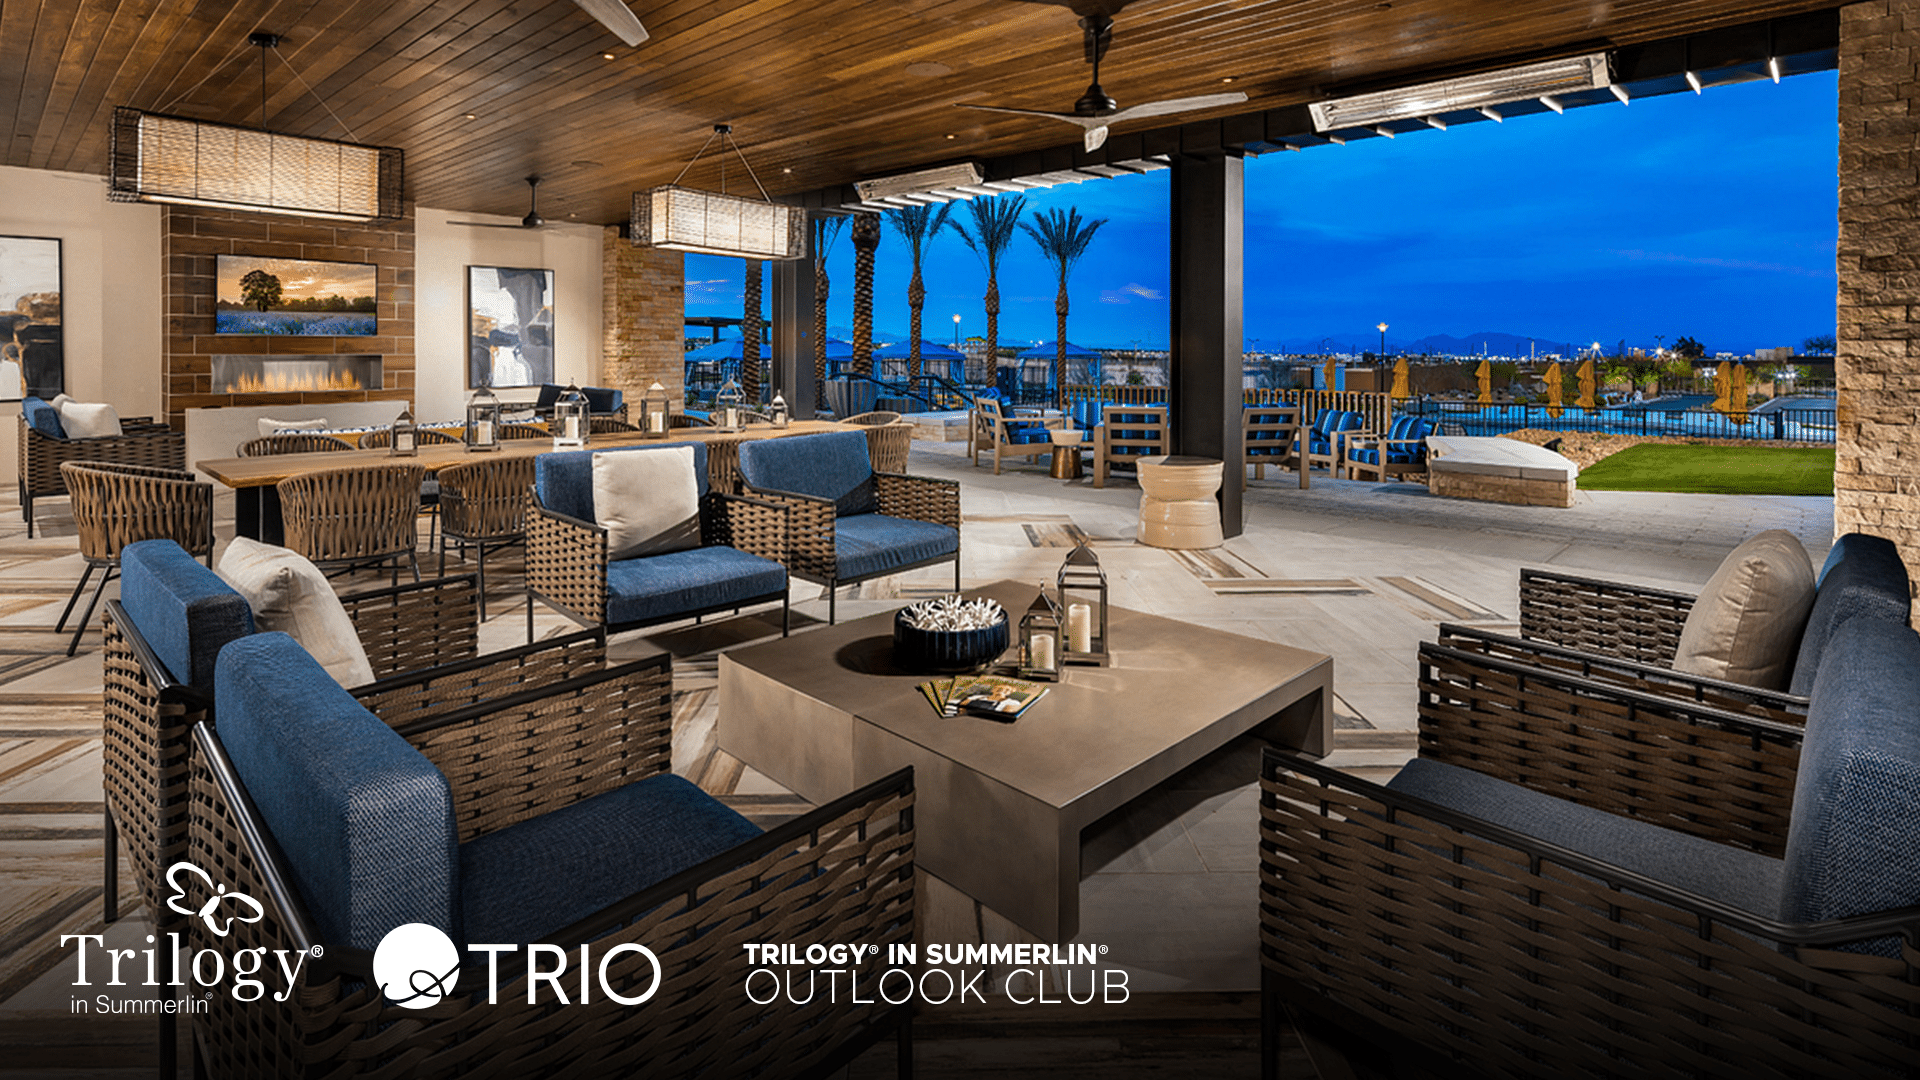 Trilogy at Summerlin – Outlook Club Virtual Tour